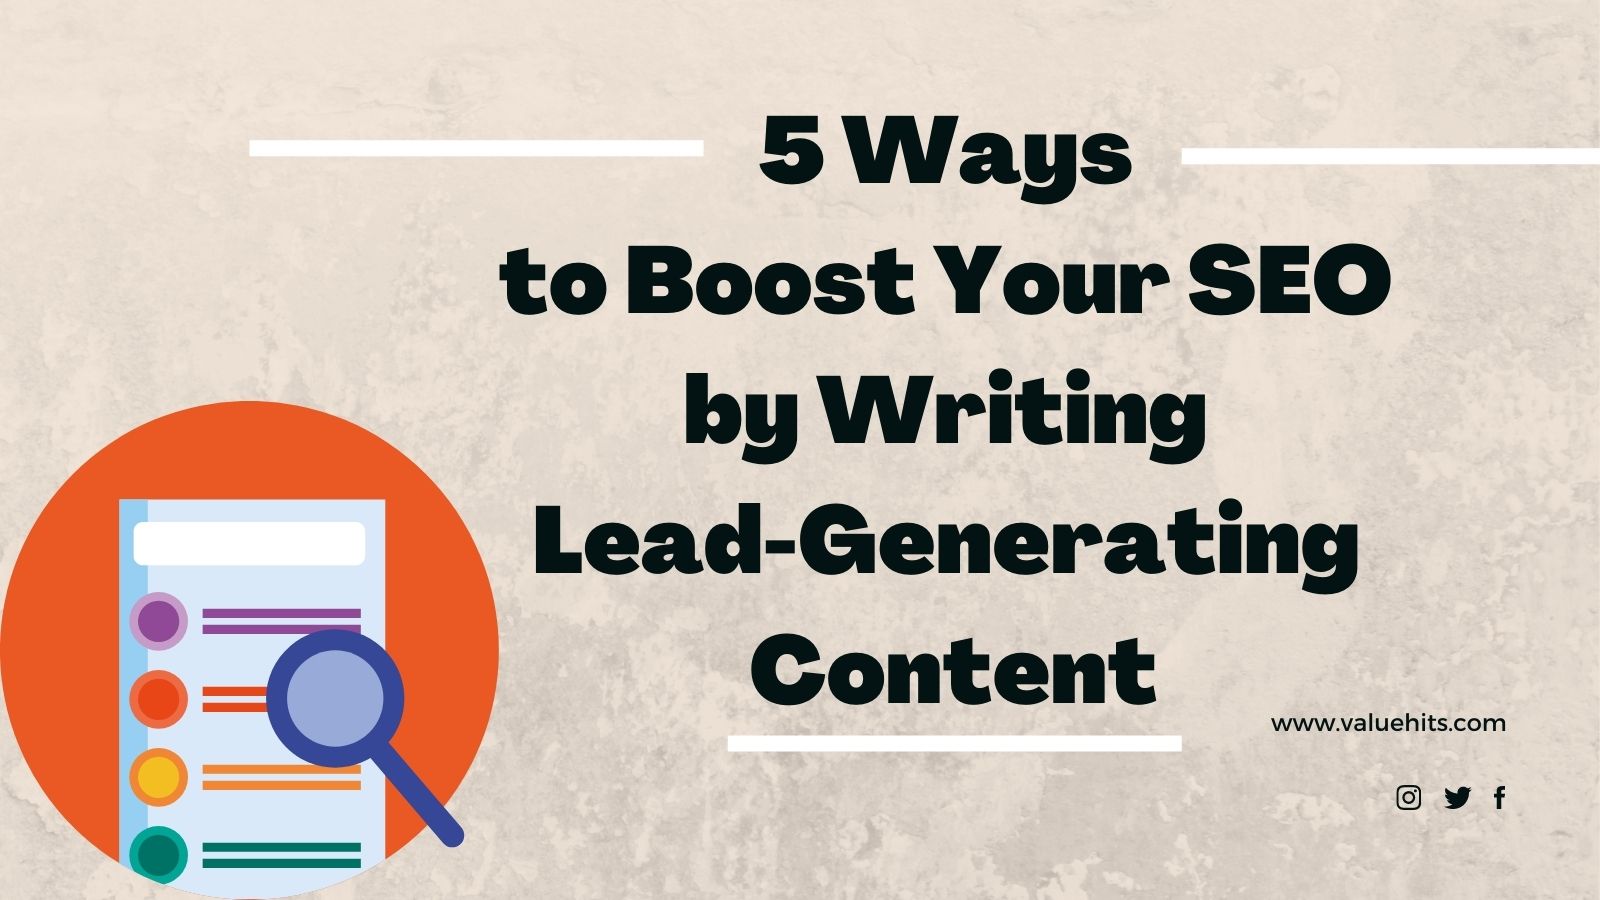 5 Ways to Boost Your SEO by Writing Lead-Generating Content